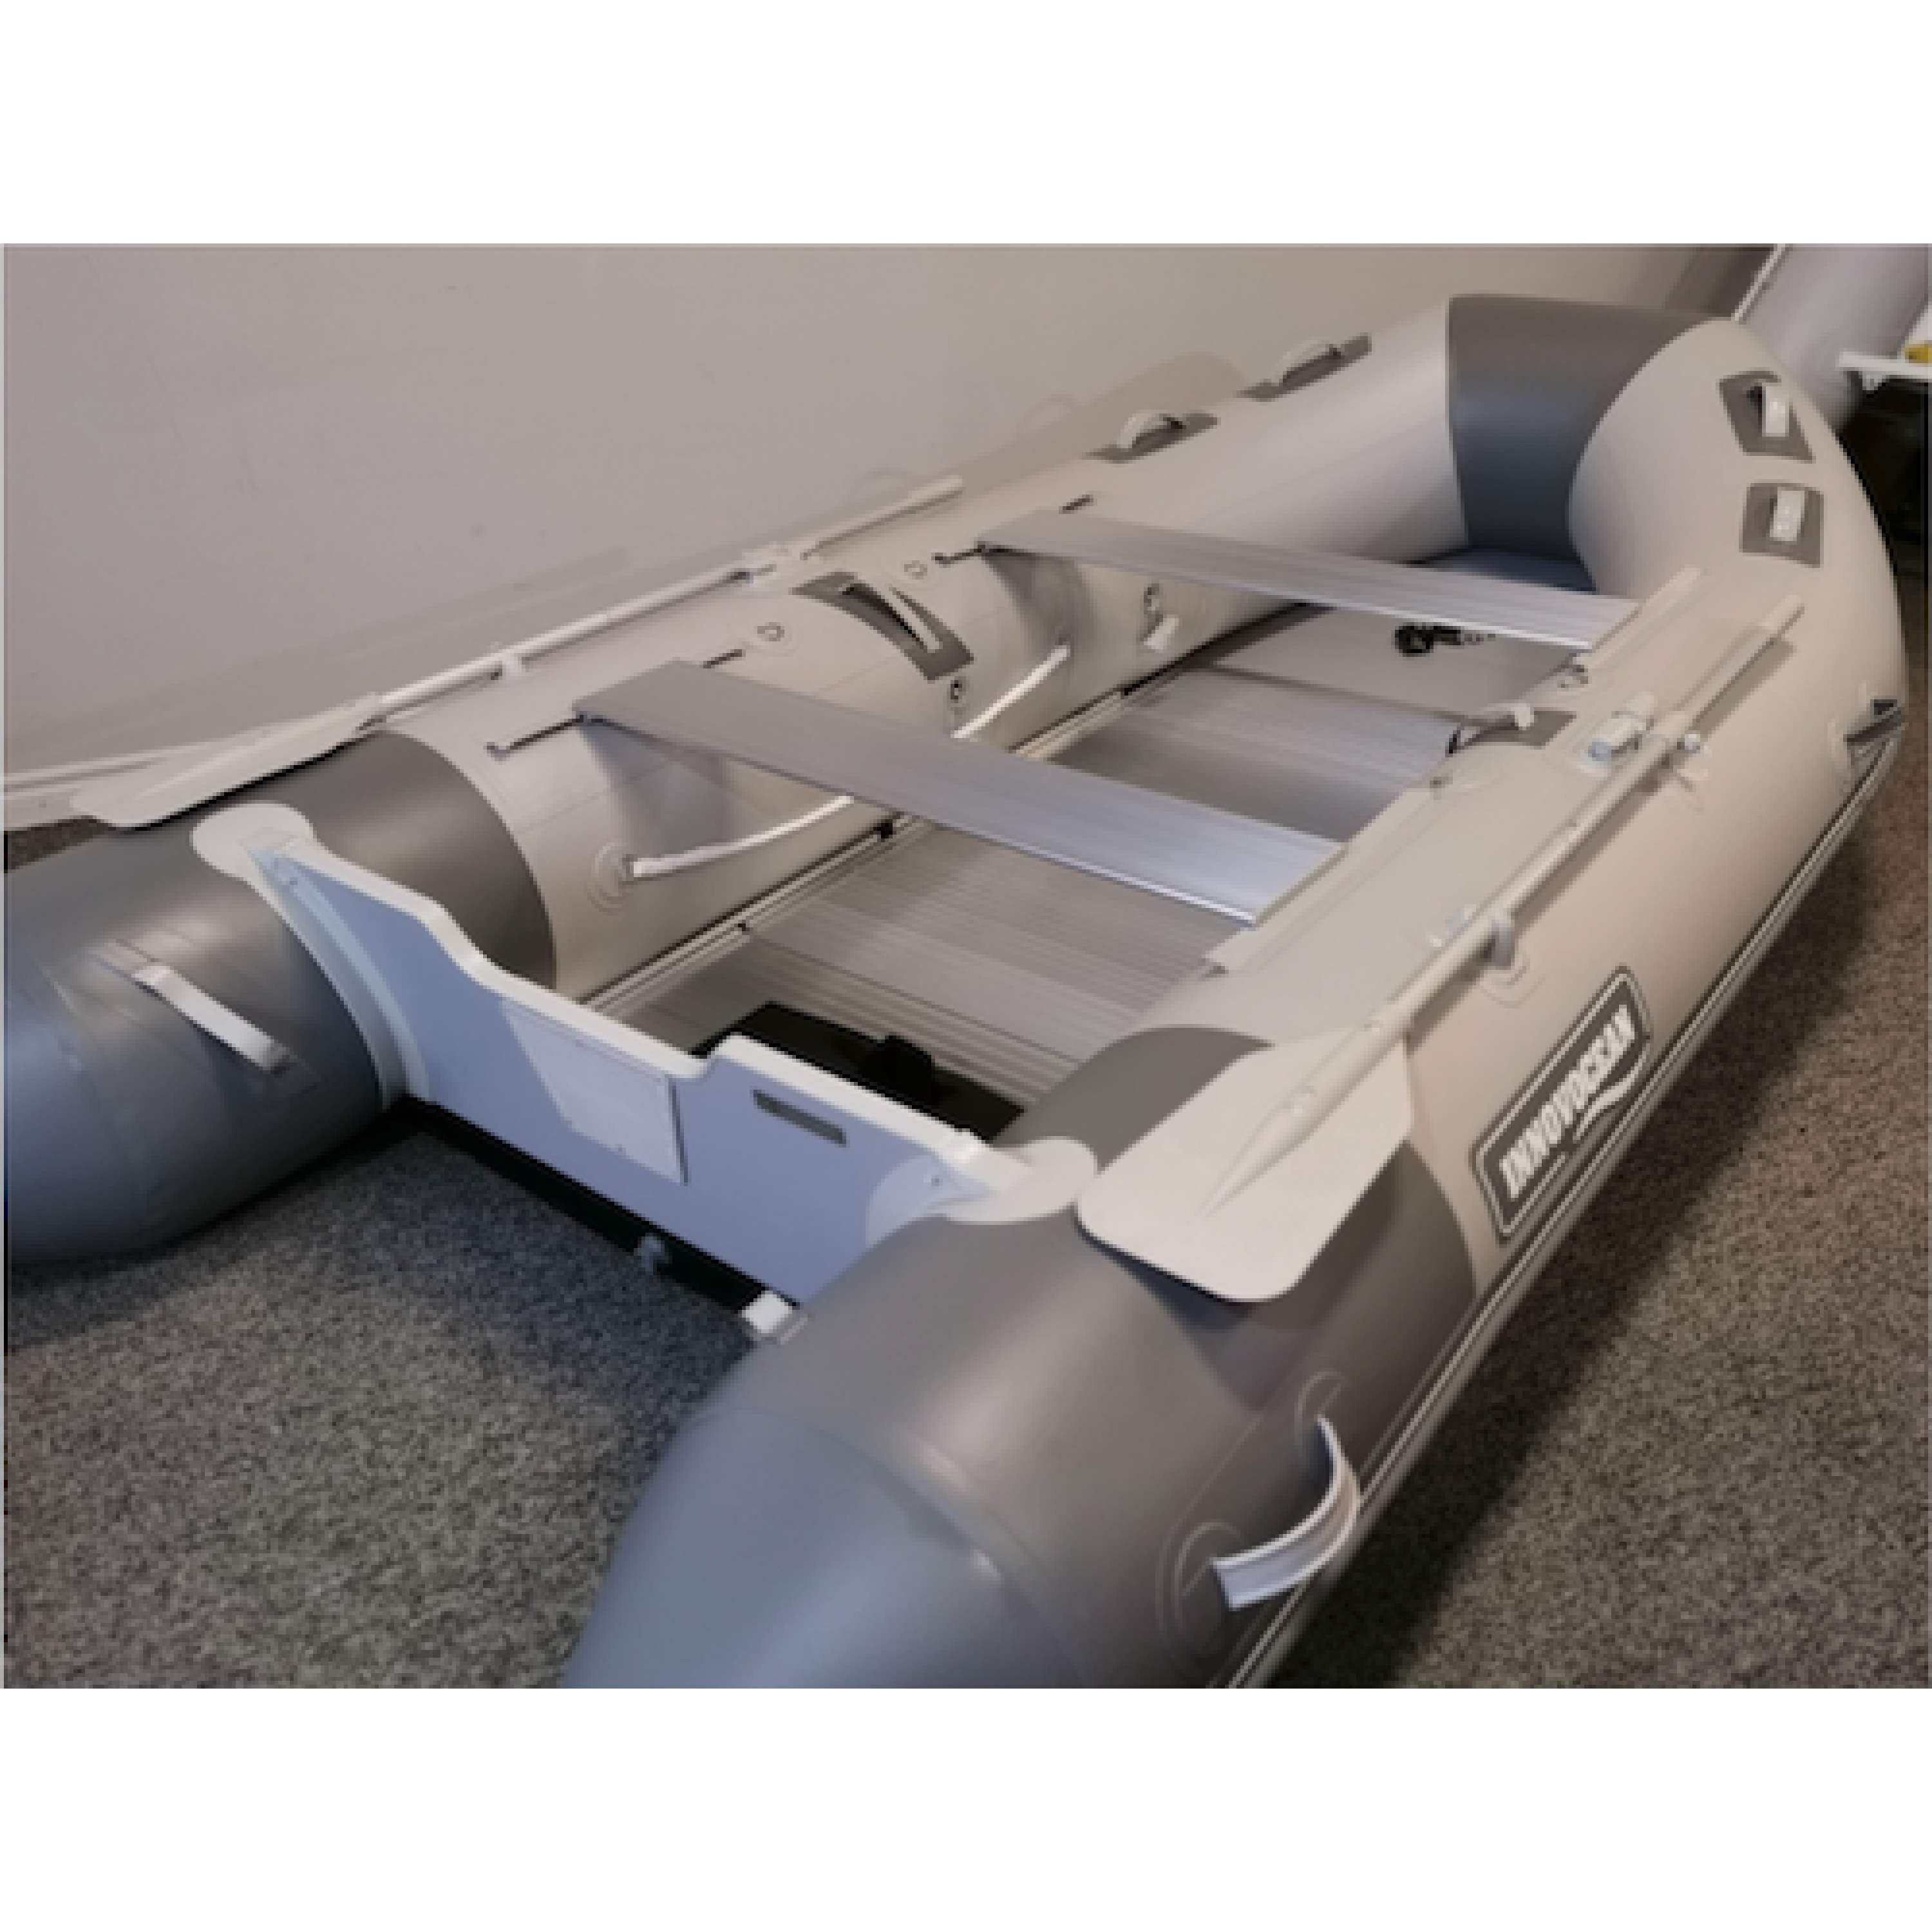 OS380B 12.5ft Osprey Basic Series Inflatable Boat